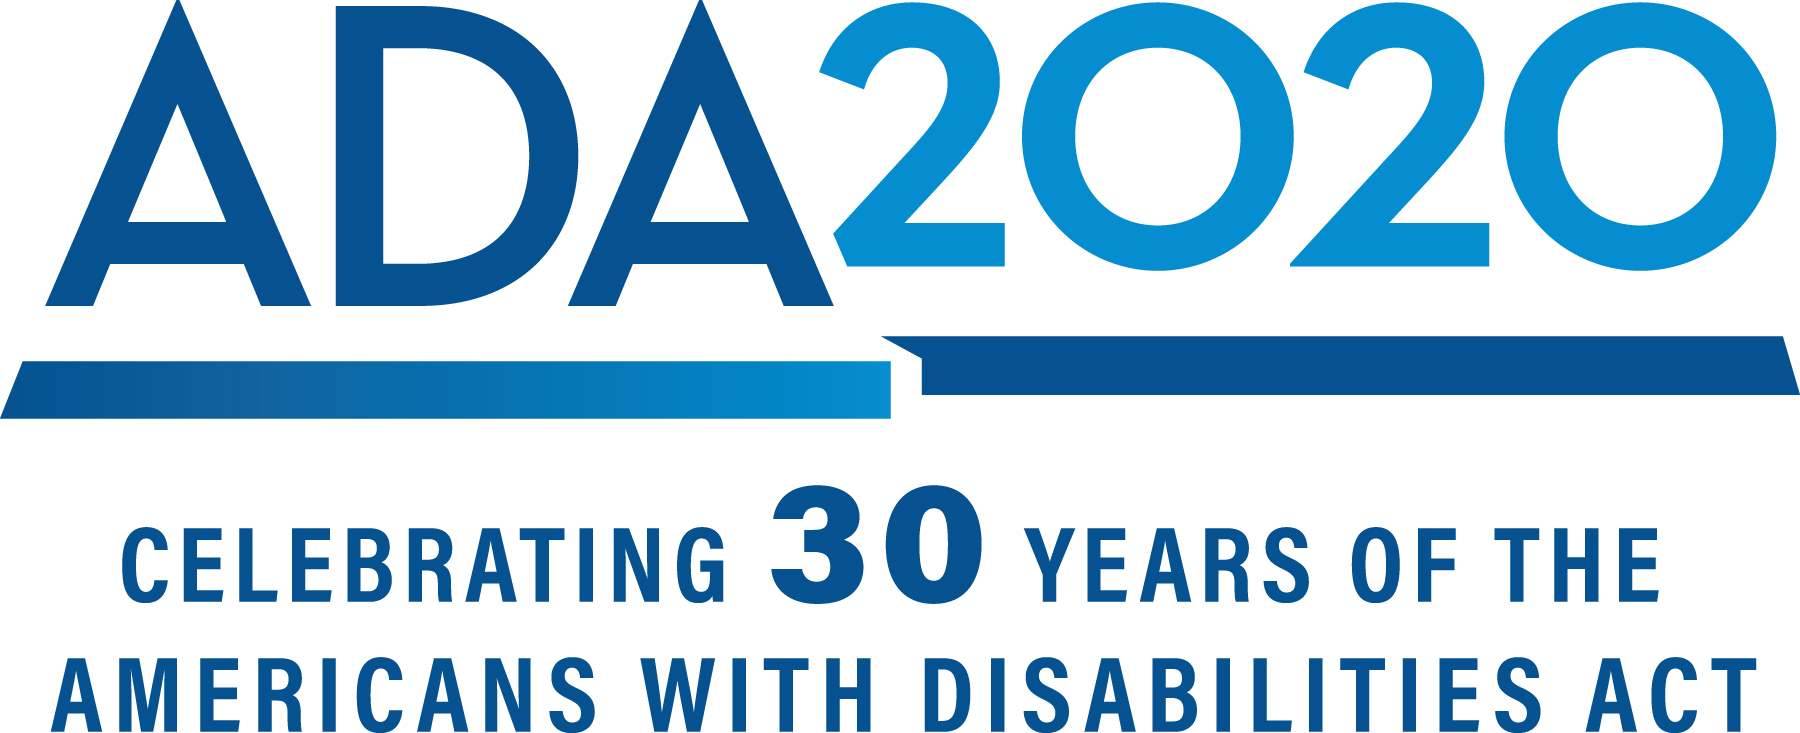 Celebrating the 30th Anniversary of the Americans with Disabilities Act